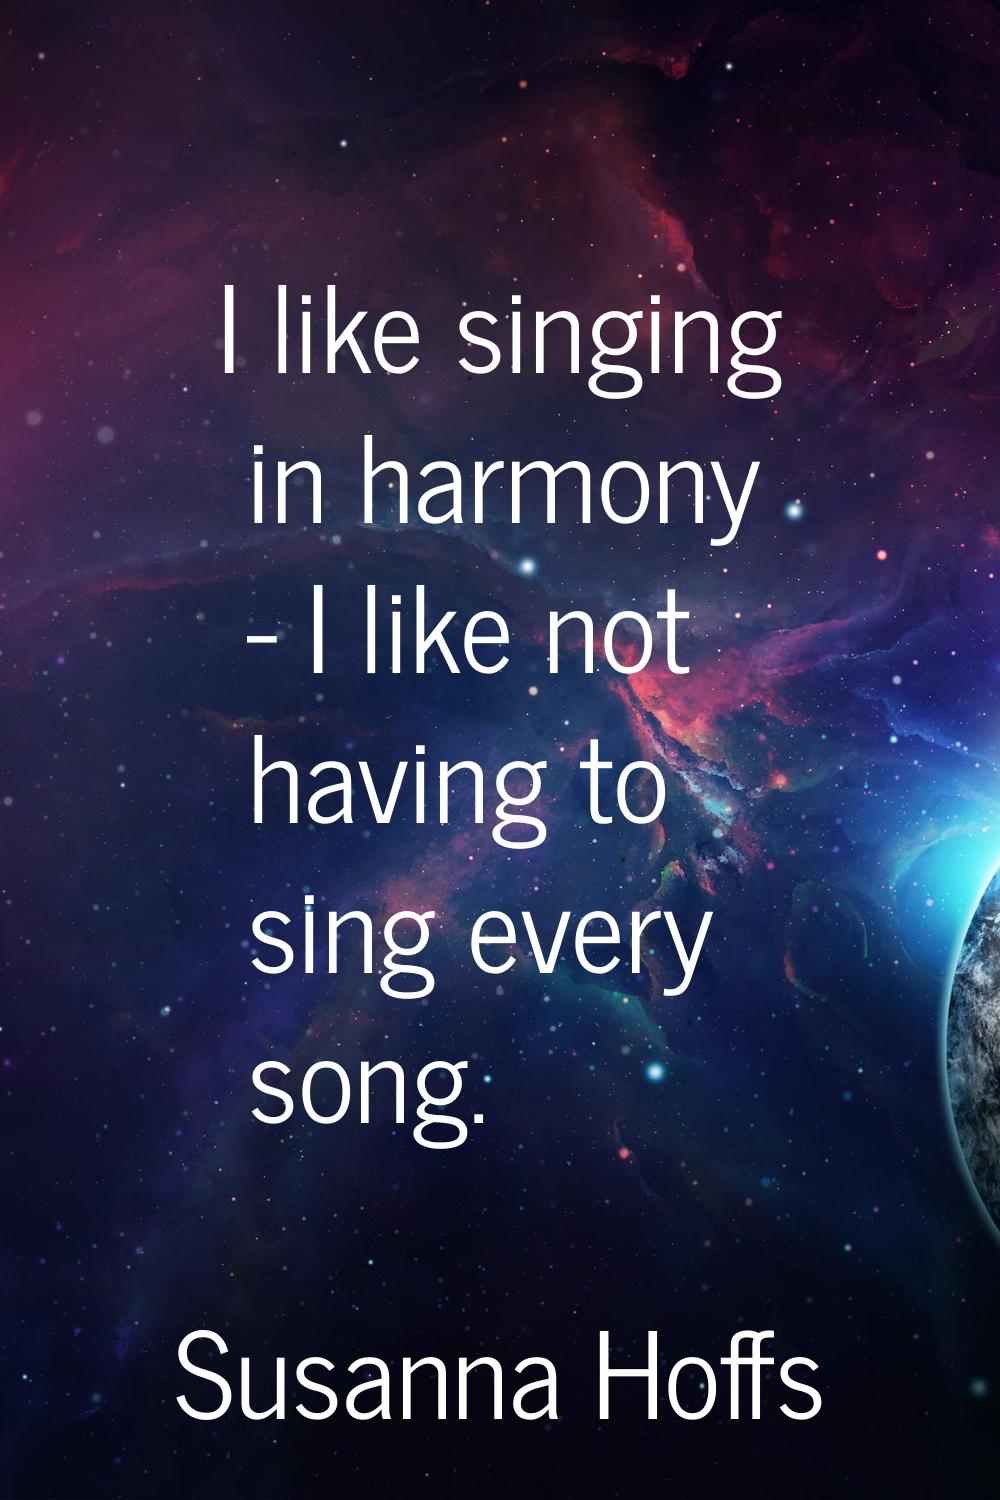 I like singing in harmony - I like not having to sing every song.